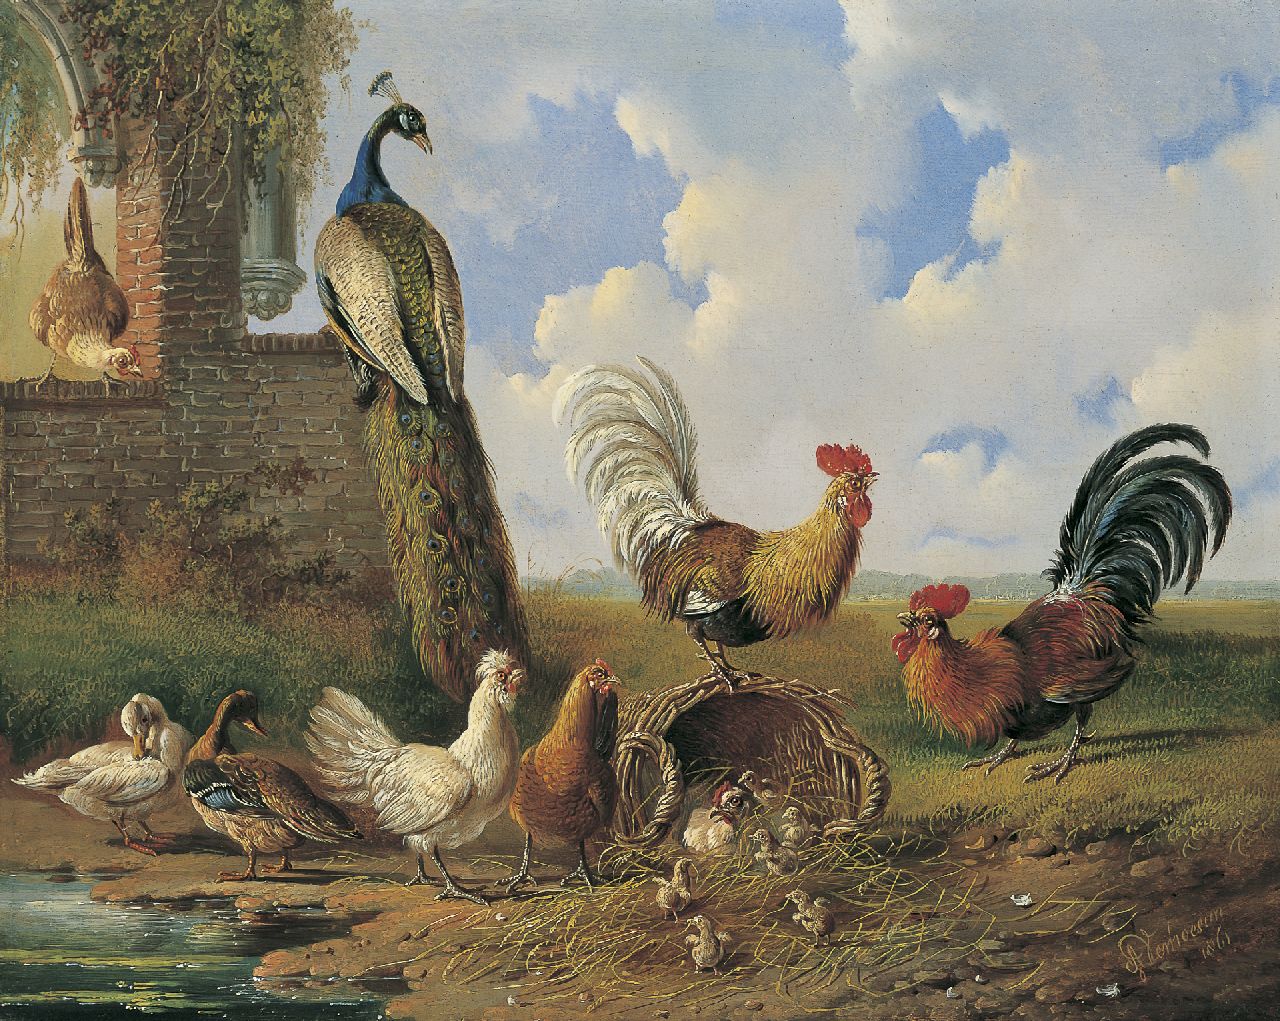 Verhoesen A.  | Albertus Verhoesen, Poultry and a peacock near a ruin, oil on panel 30.4 x 38.3 cm, signed l.r. and dated 1861